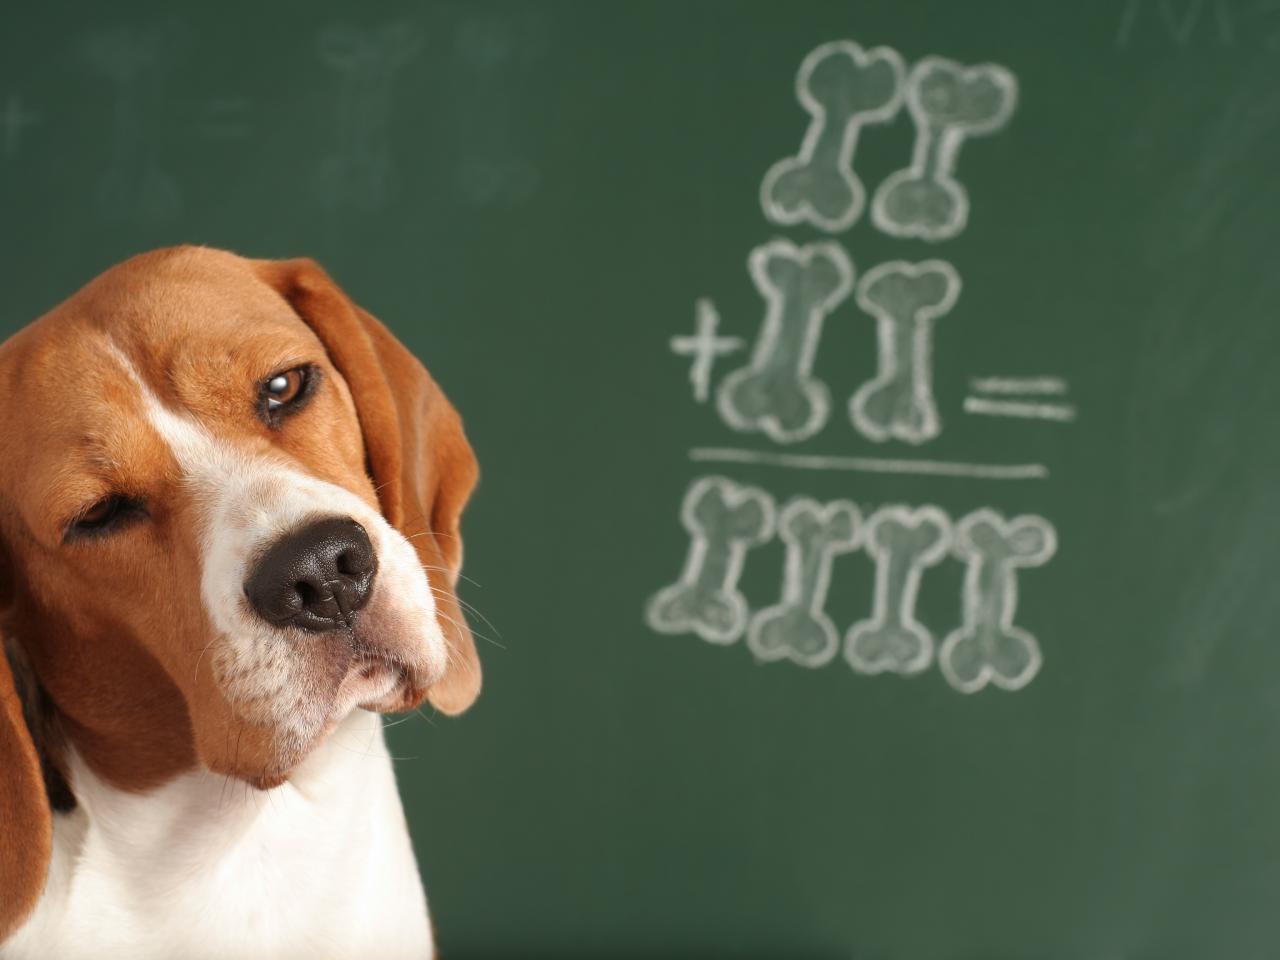 10 Essential Back to School Supplies Every Teacher Needs - 2 Peas and a Dog